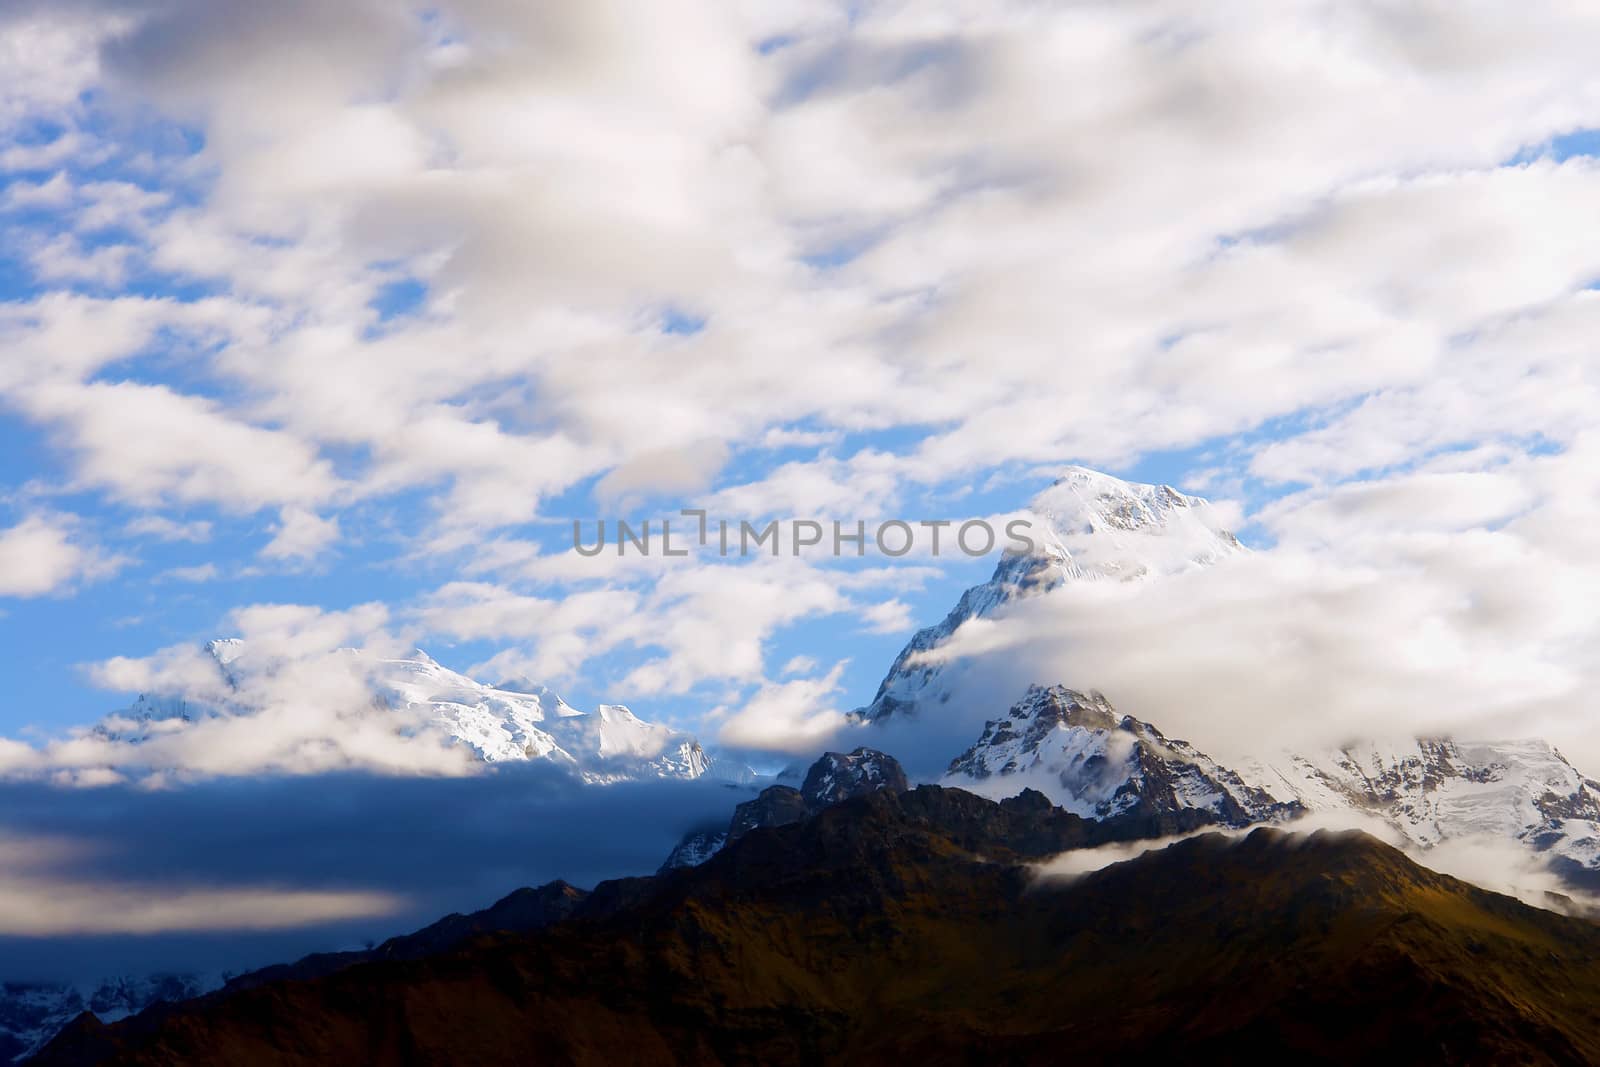 View of Annapurna mountain, trek to base camp conservation area, Nepal